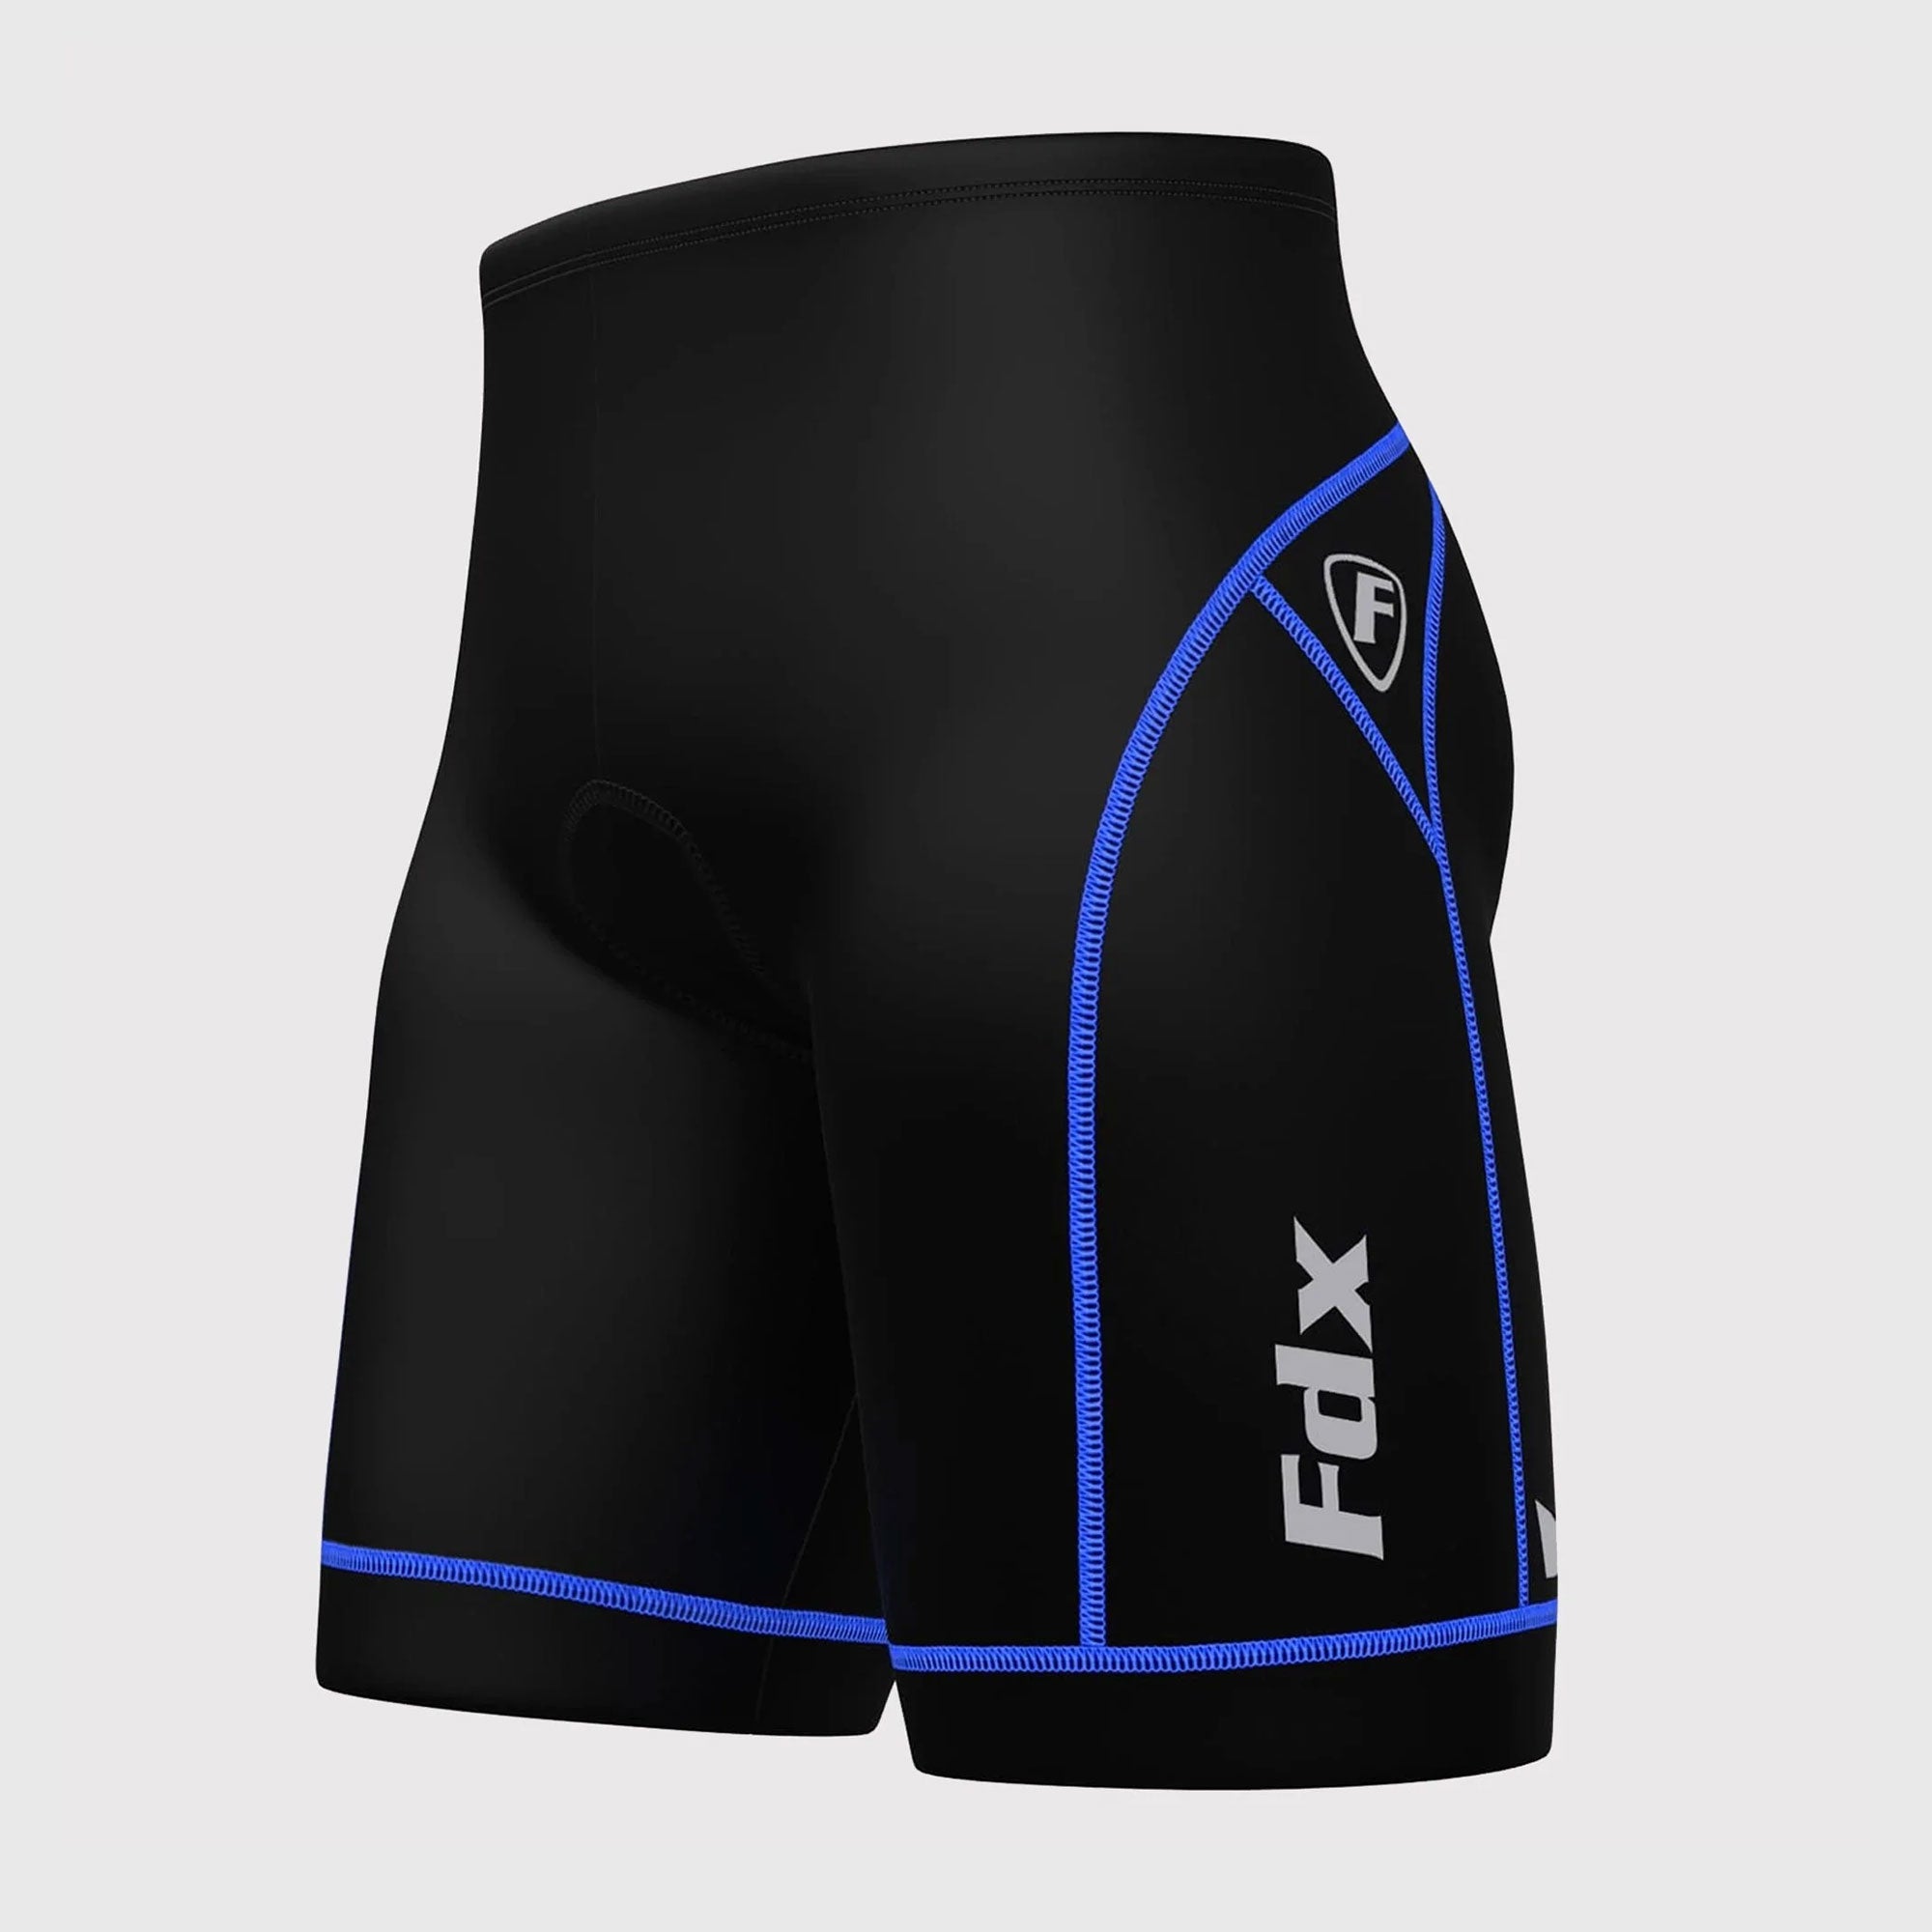 Fdx Mens Black & Blue Gel Padded Cycling Shorts for Summer Best Outdoor Knickers Road Bike Short Length Pants - Ridest